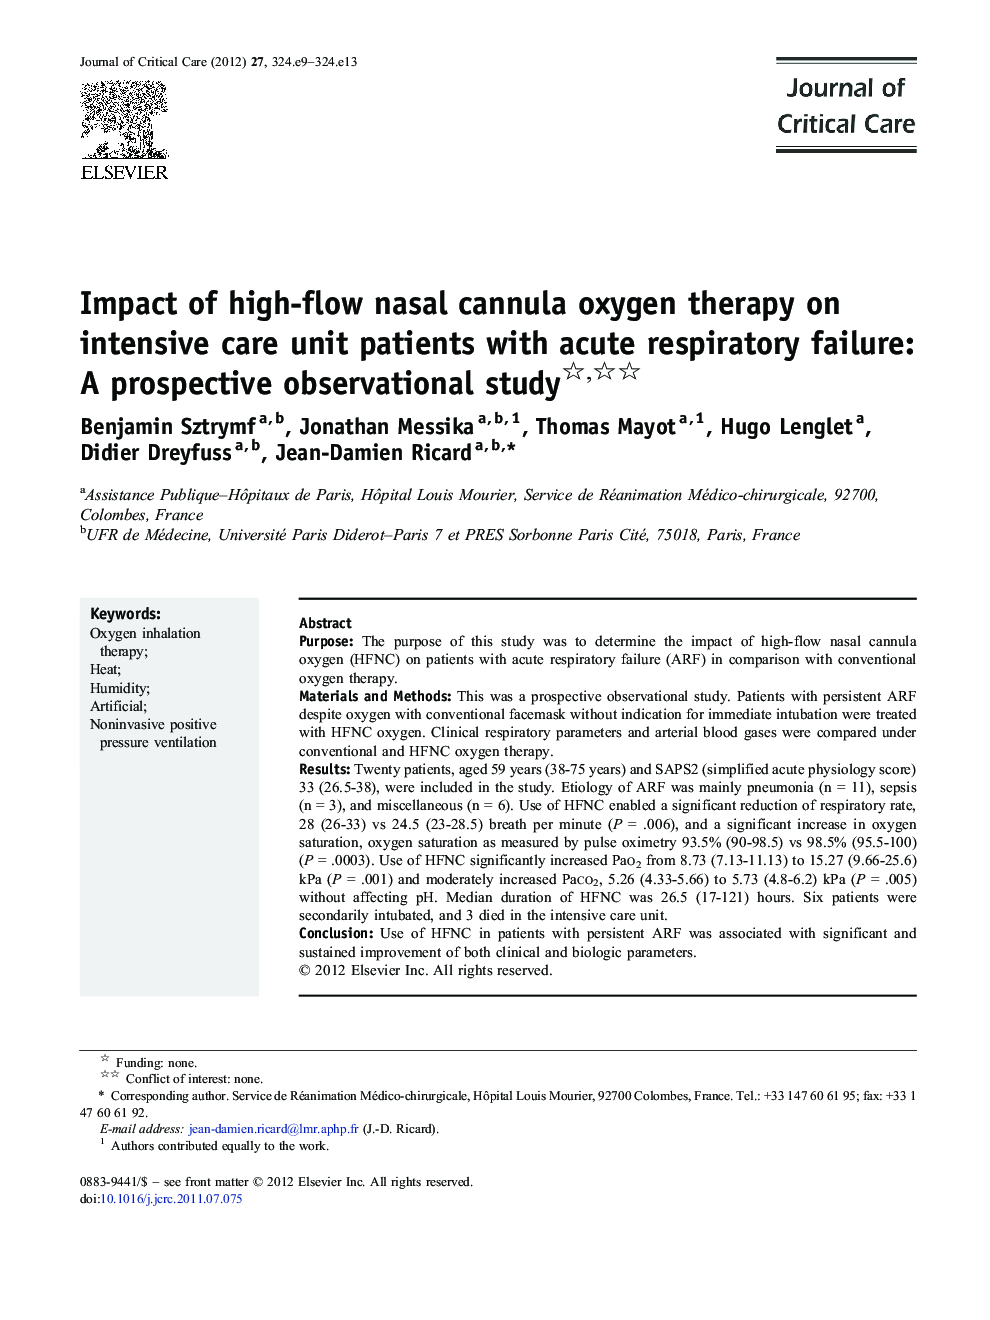 Impact of high-flow nasal cannula oxygen therapy on intensive care unit patients with acute respiratory failure: A prospective observational study